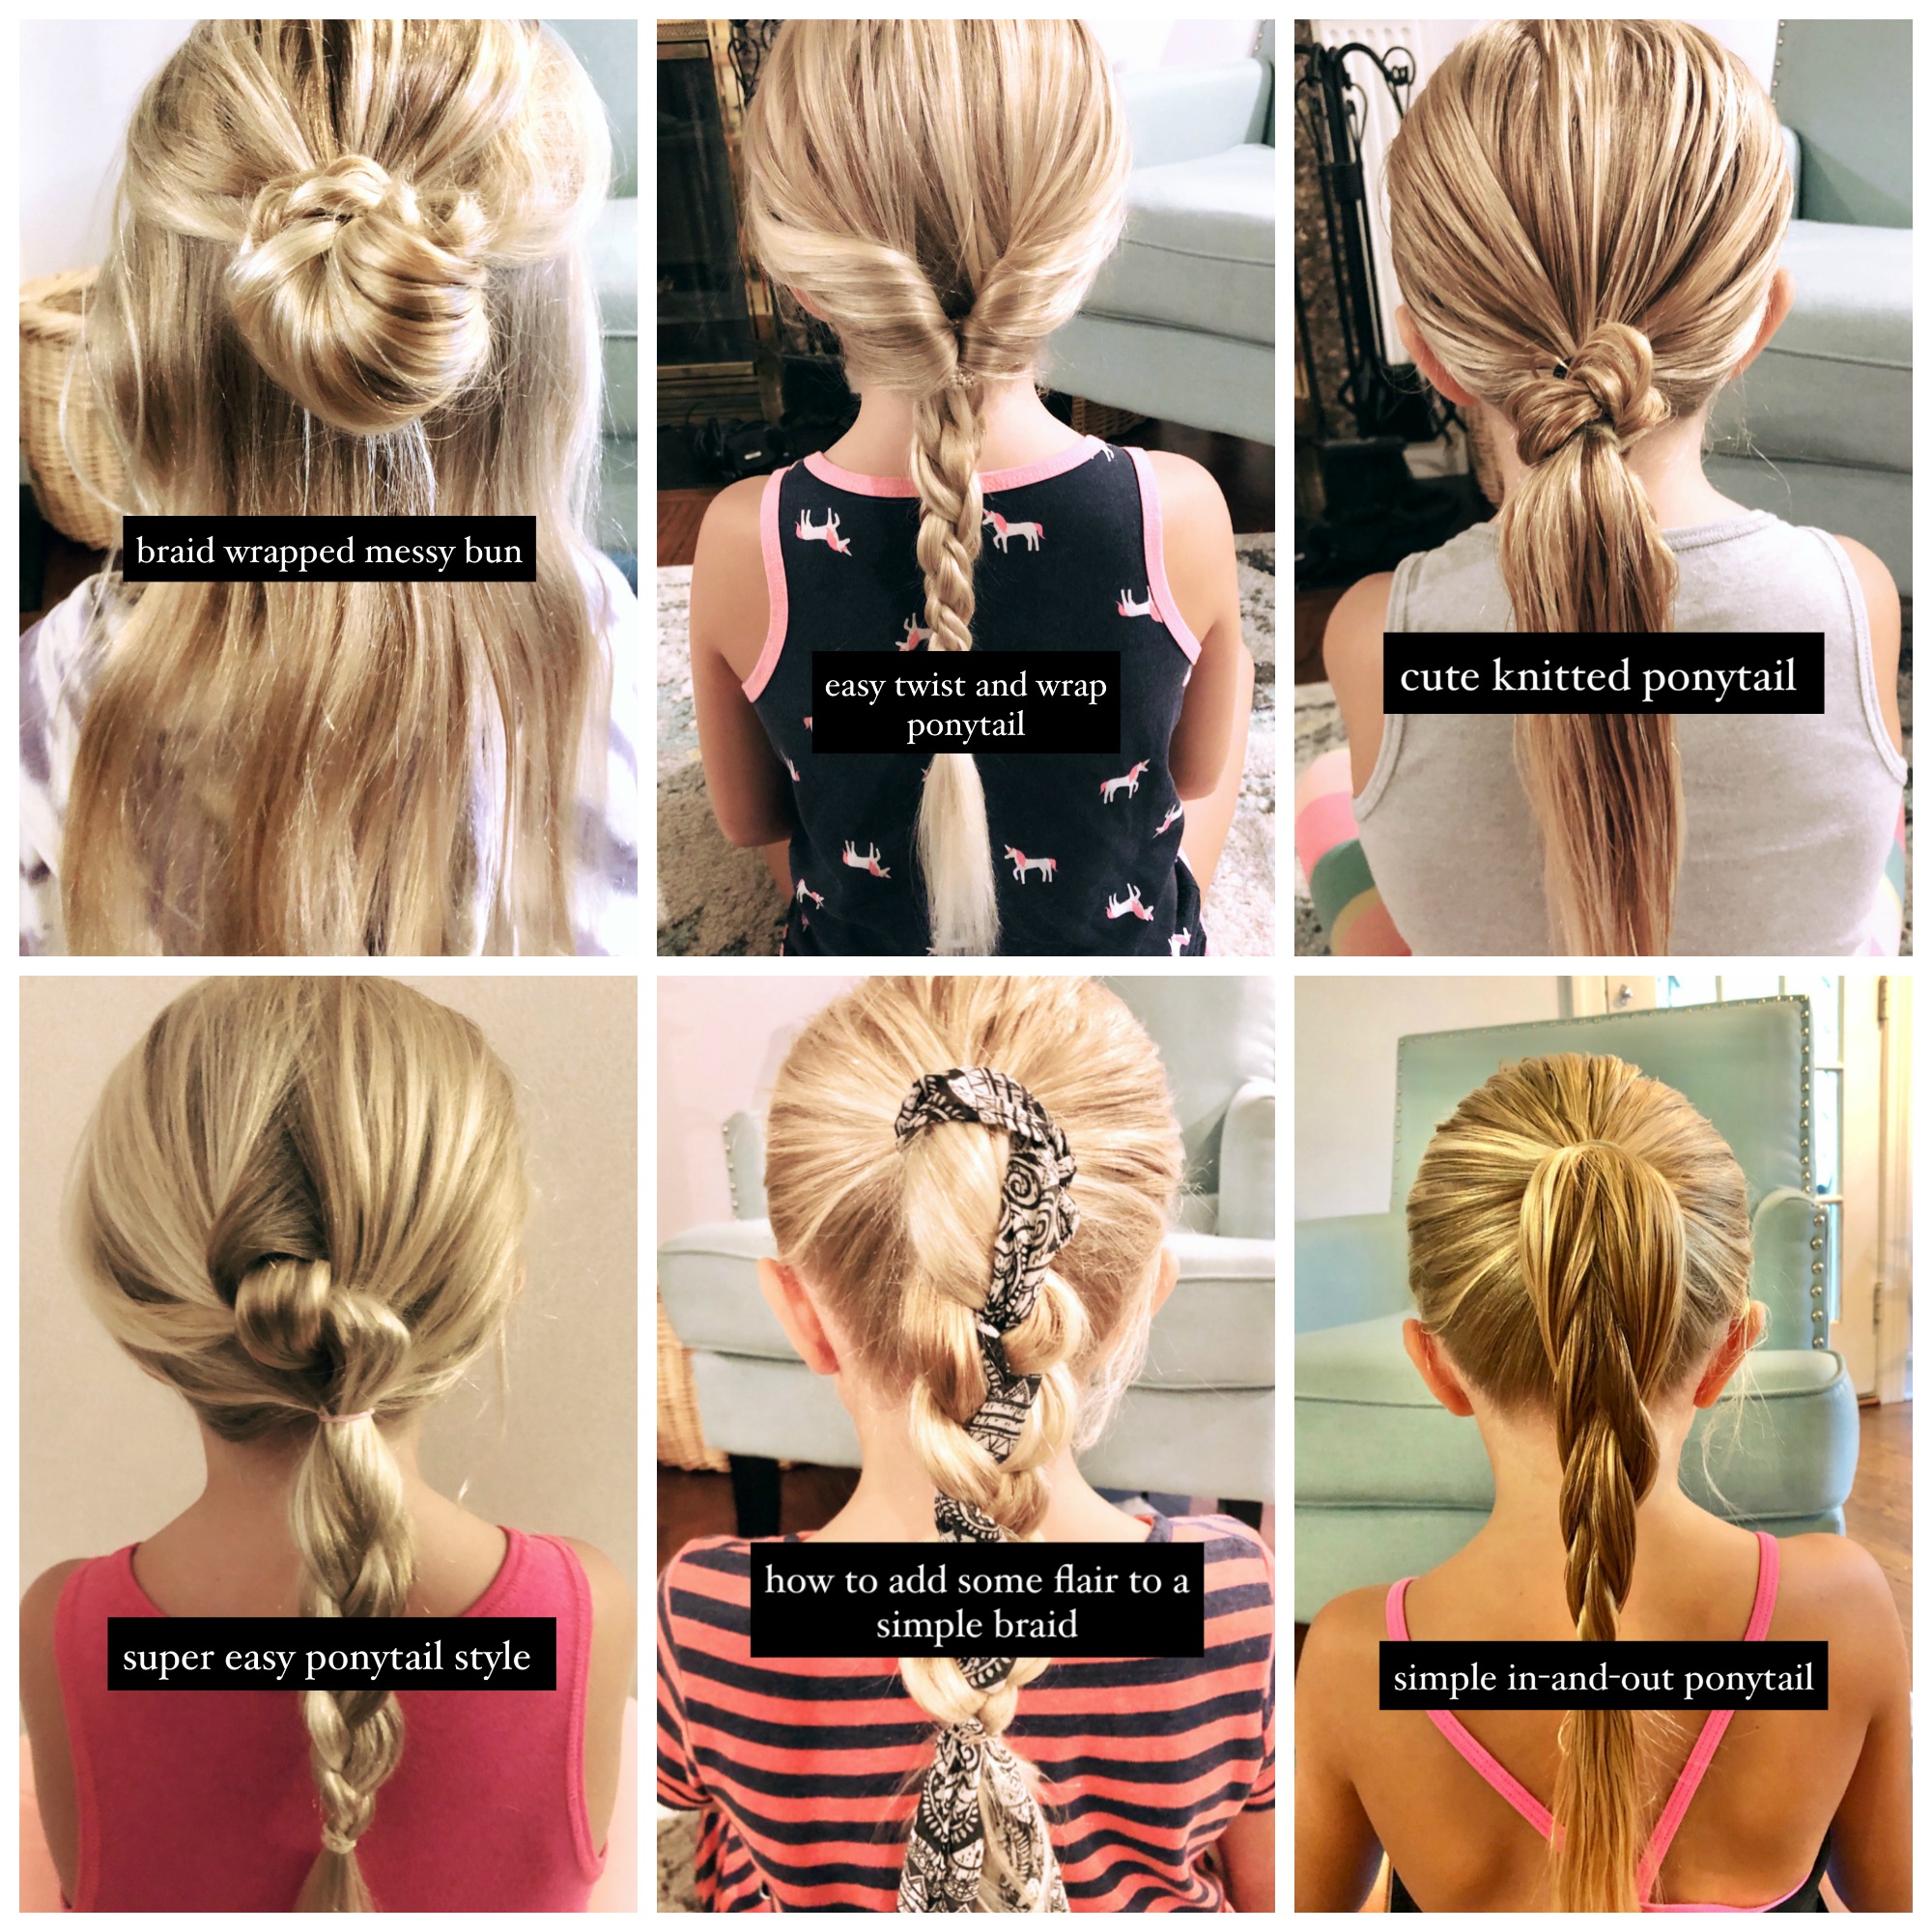 10 Hairstyles For Girls With Long Hair »Read More-smartinvestplan.com